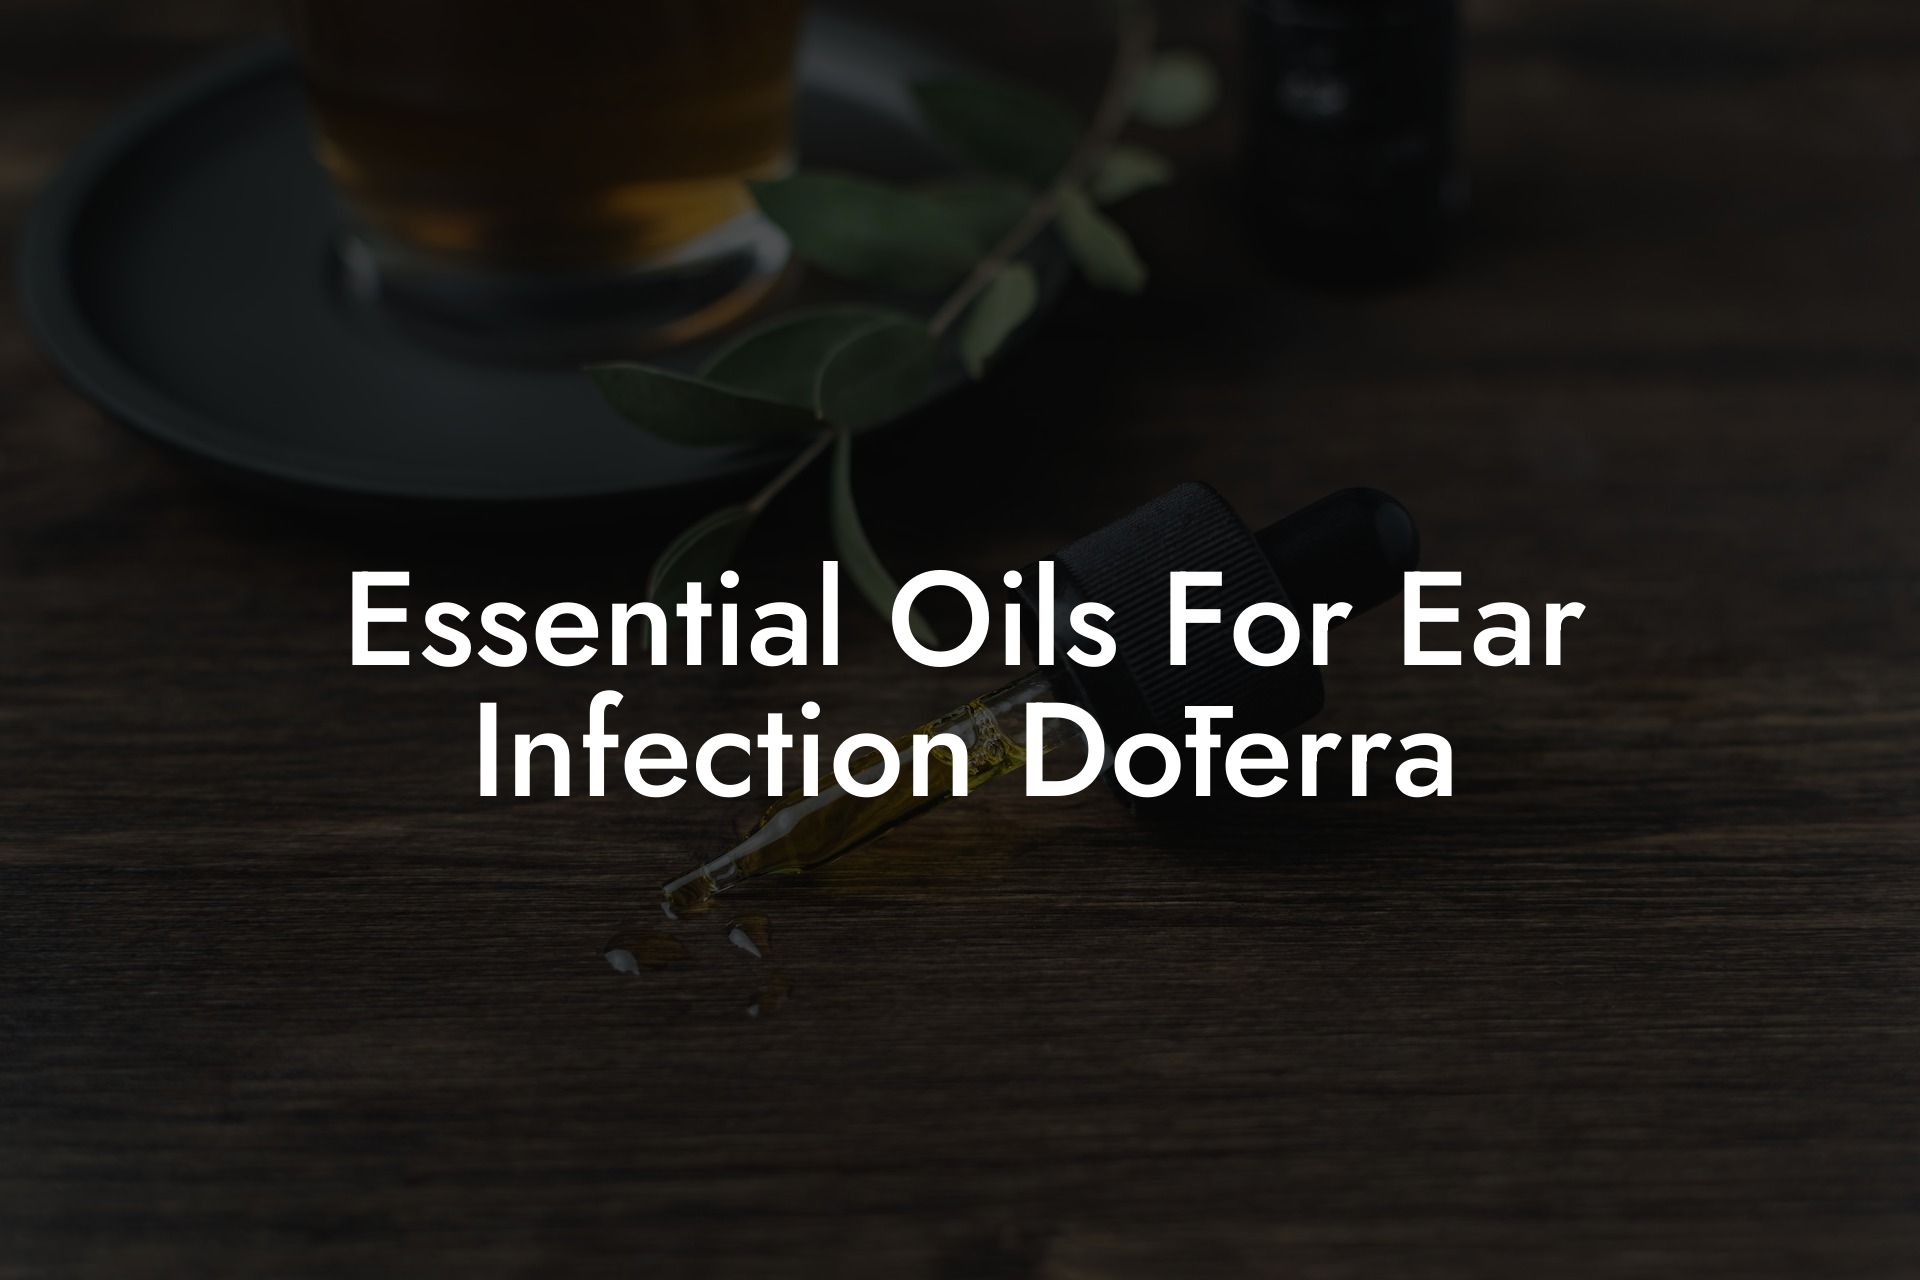 Essential Oils For Ear Infection Dōterra